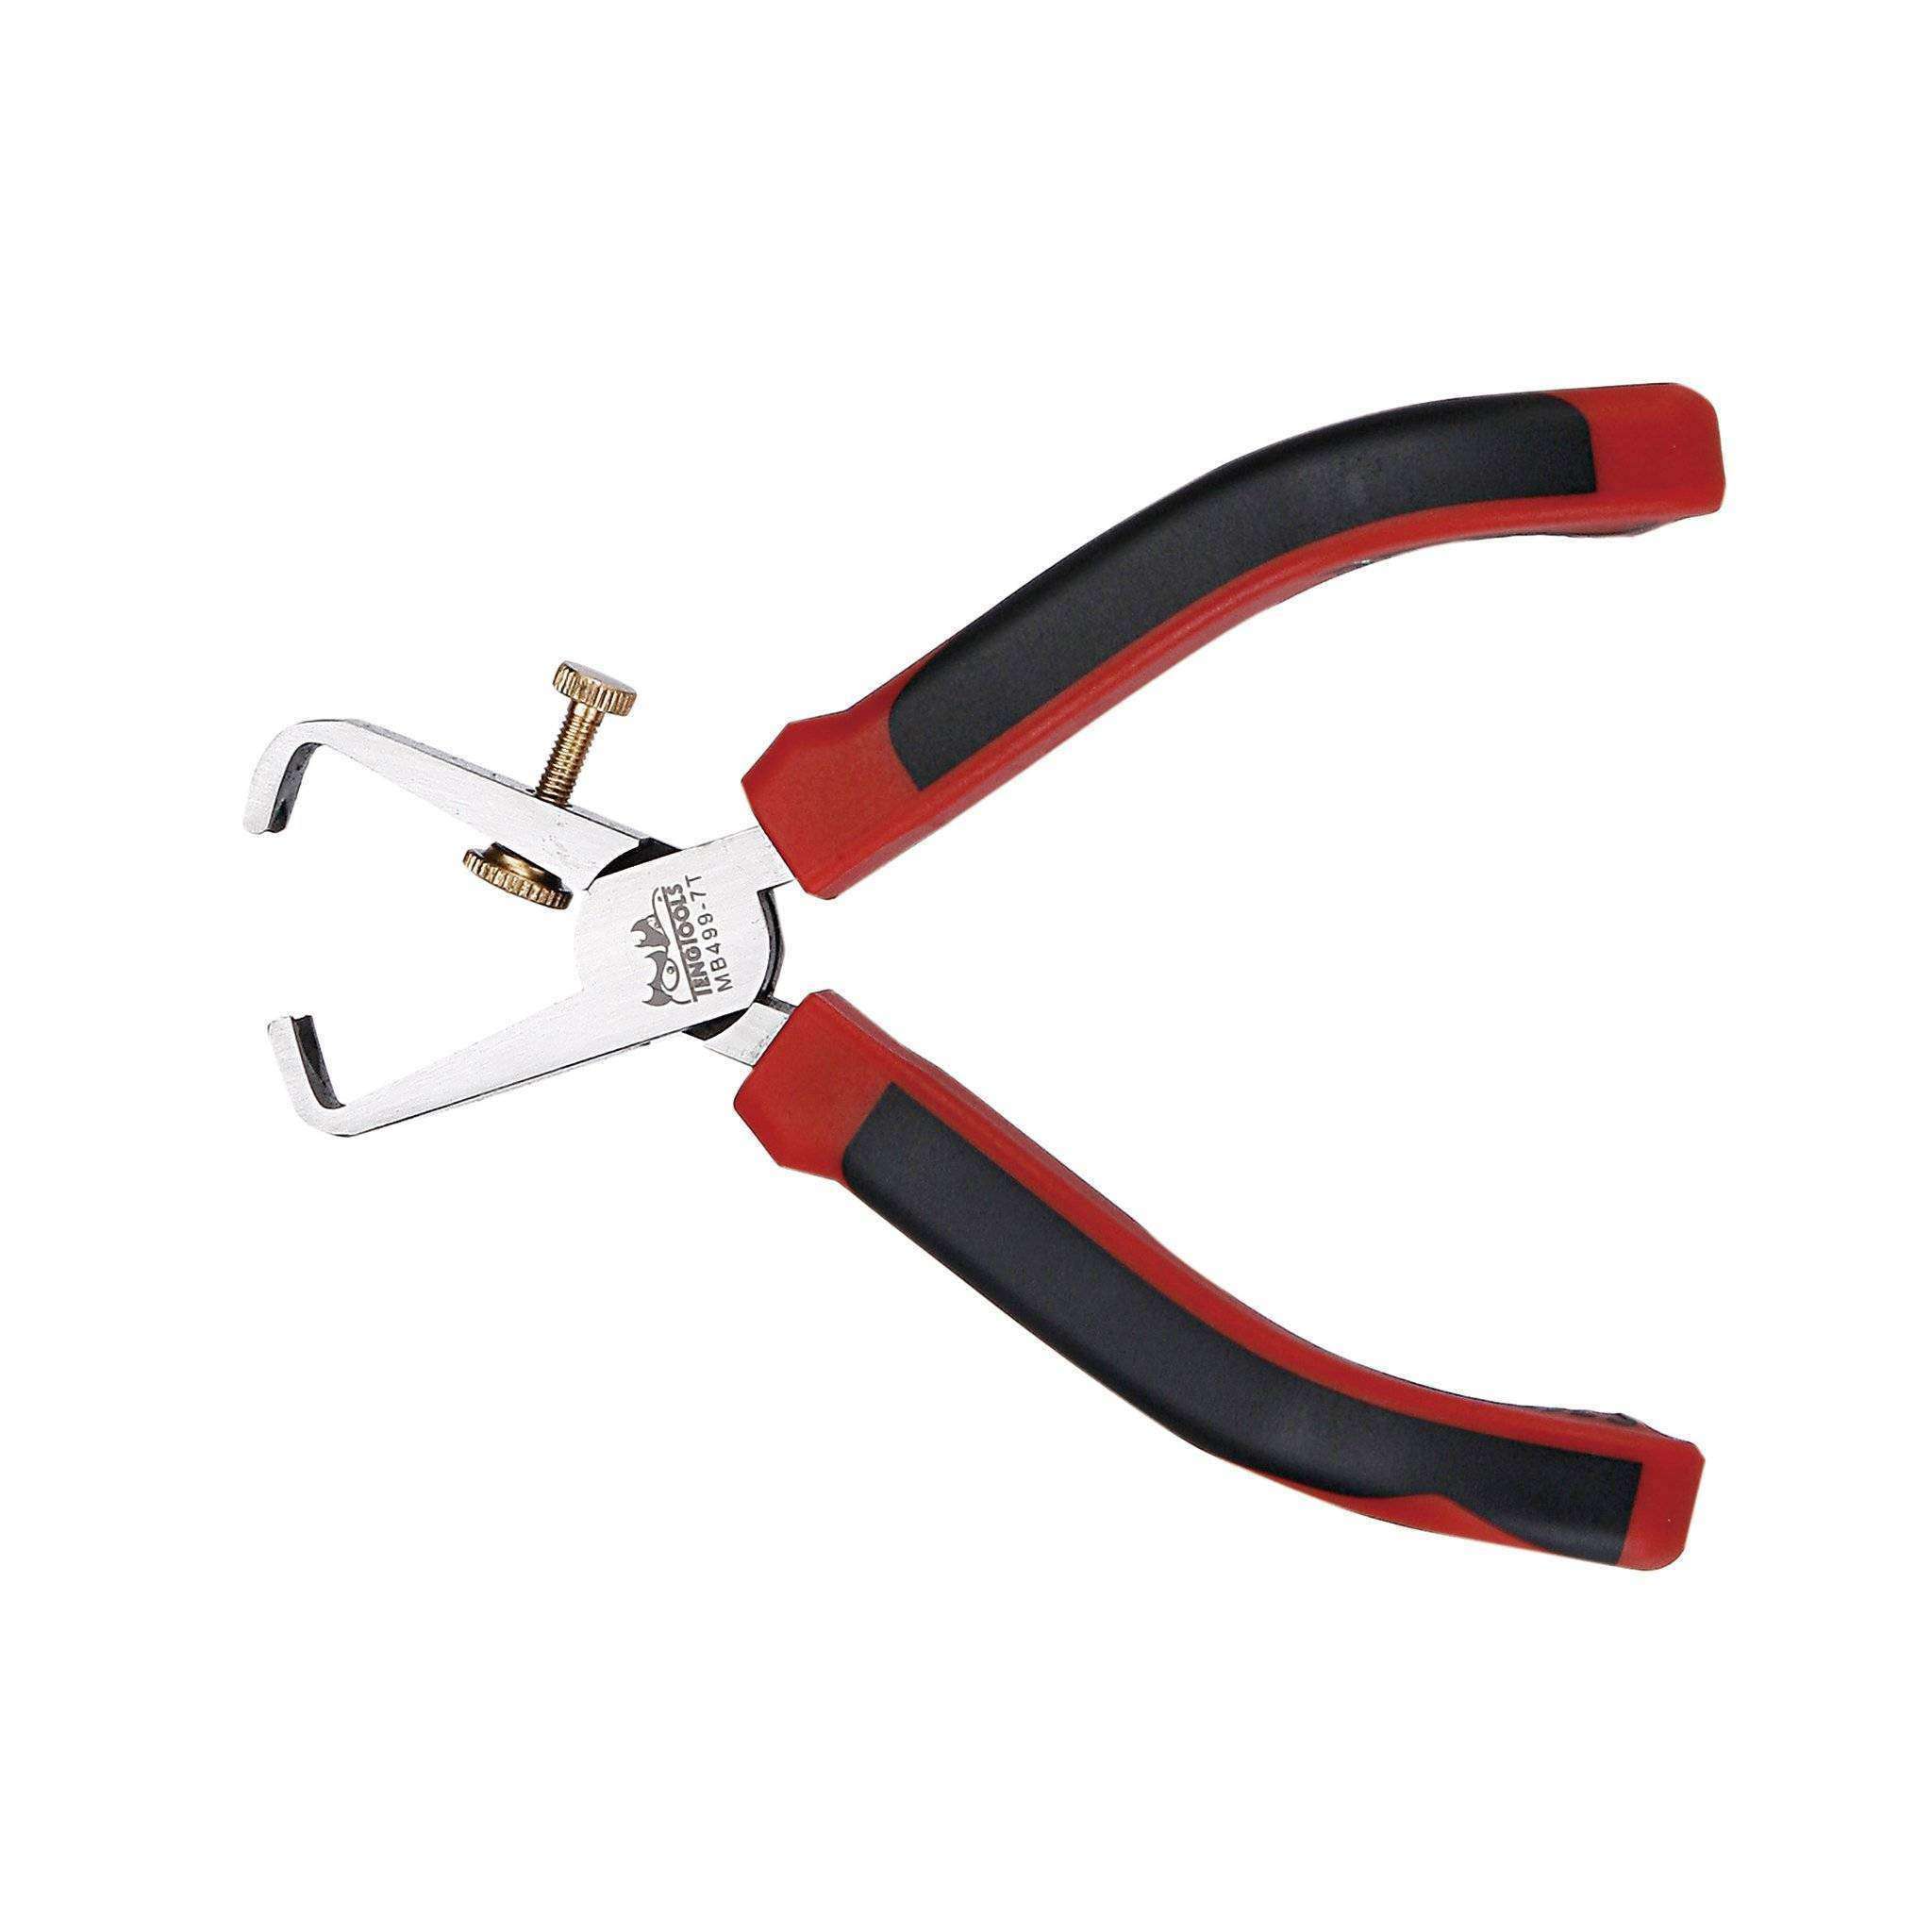 Teng Tools 6 Inch Professional TPR Grip Wire Stripping Pliers / Tool - MB499-7T